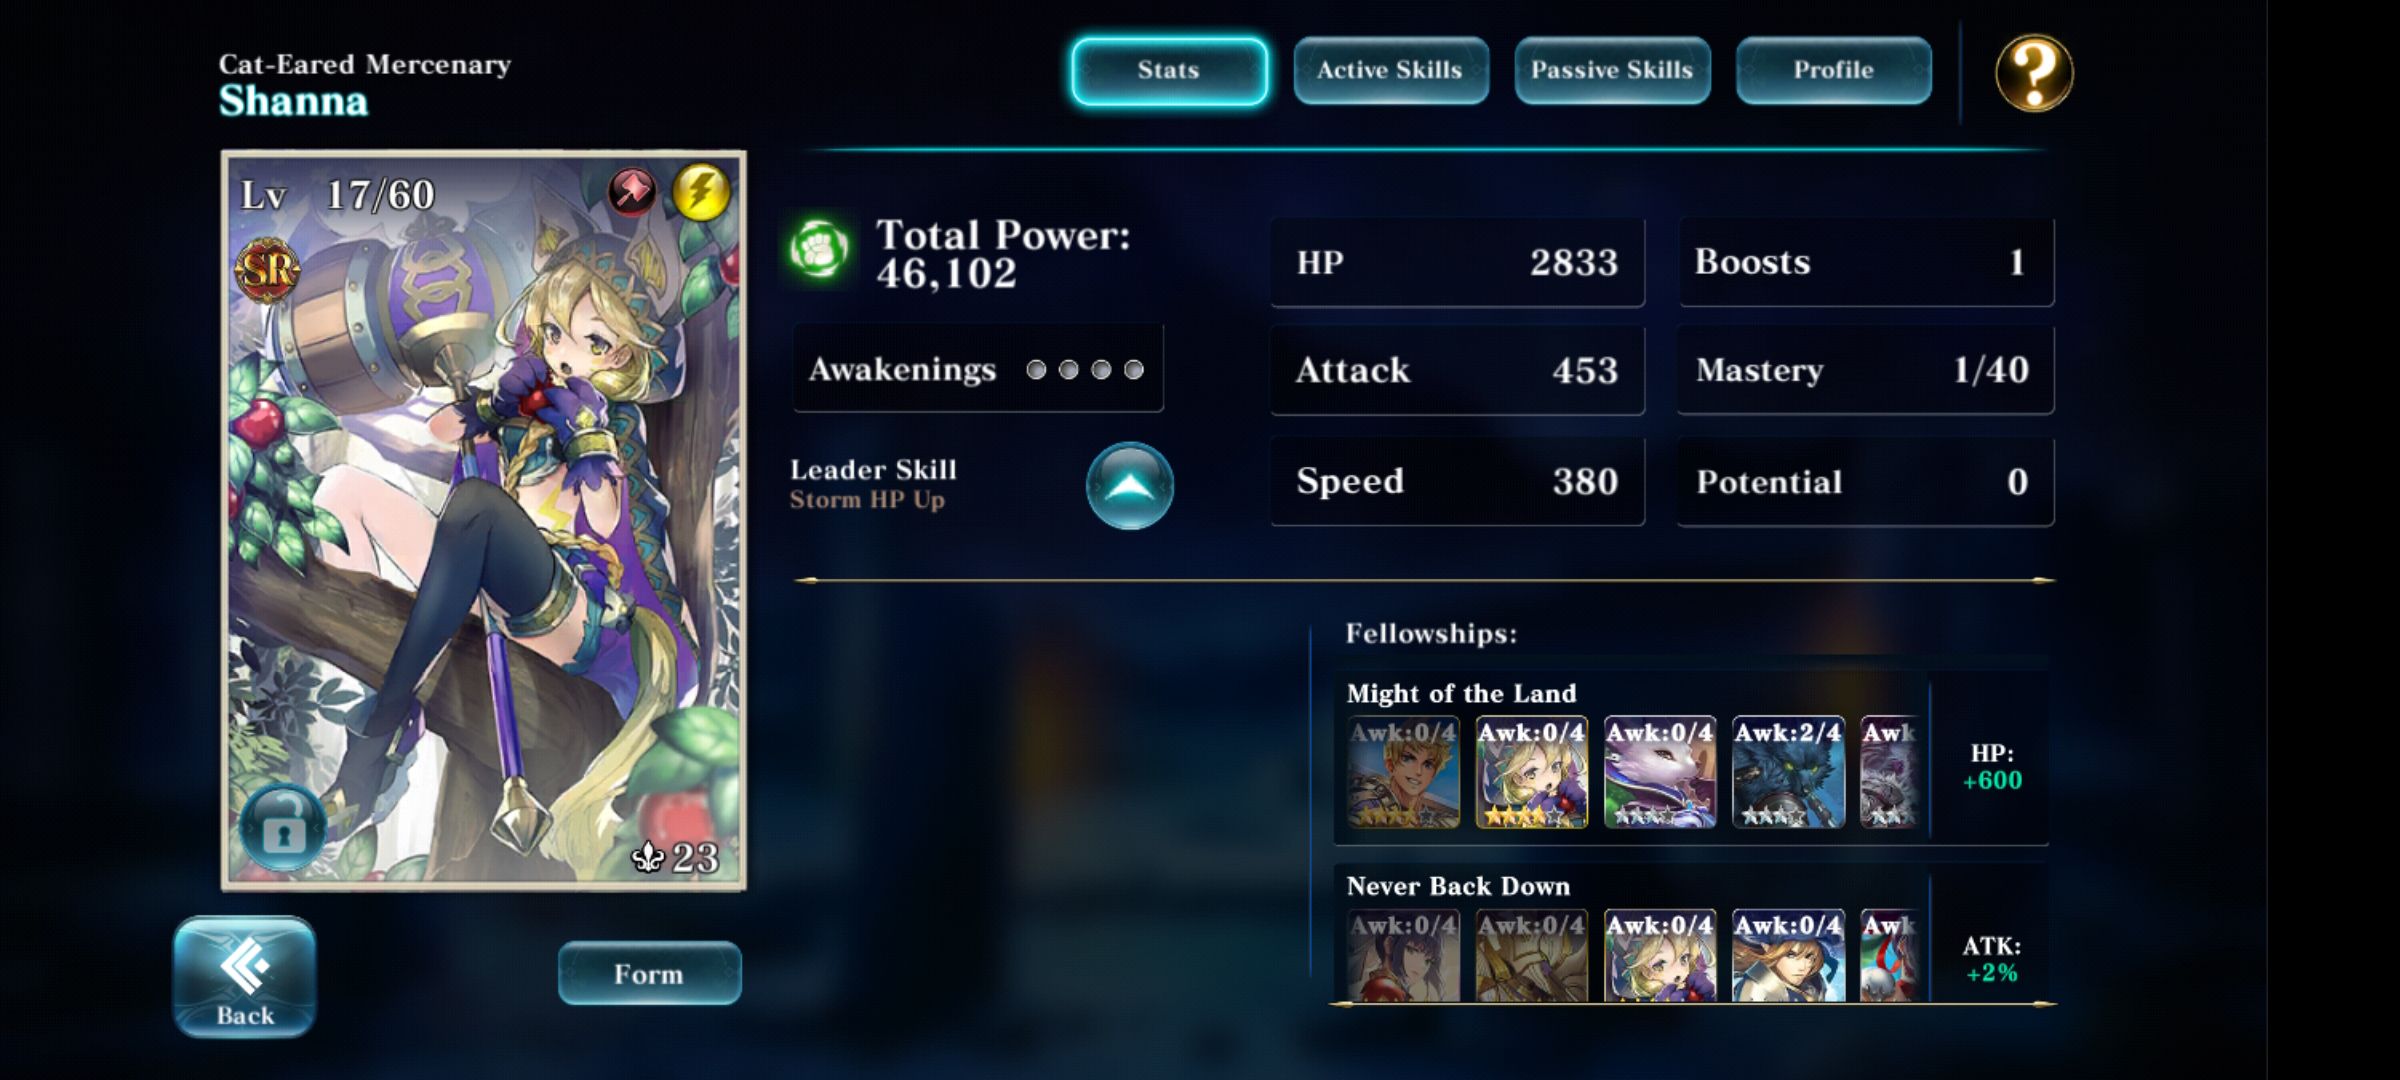 shanna stats and total power display with character art on left side